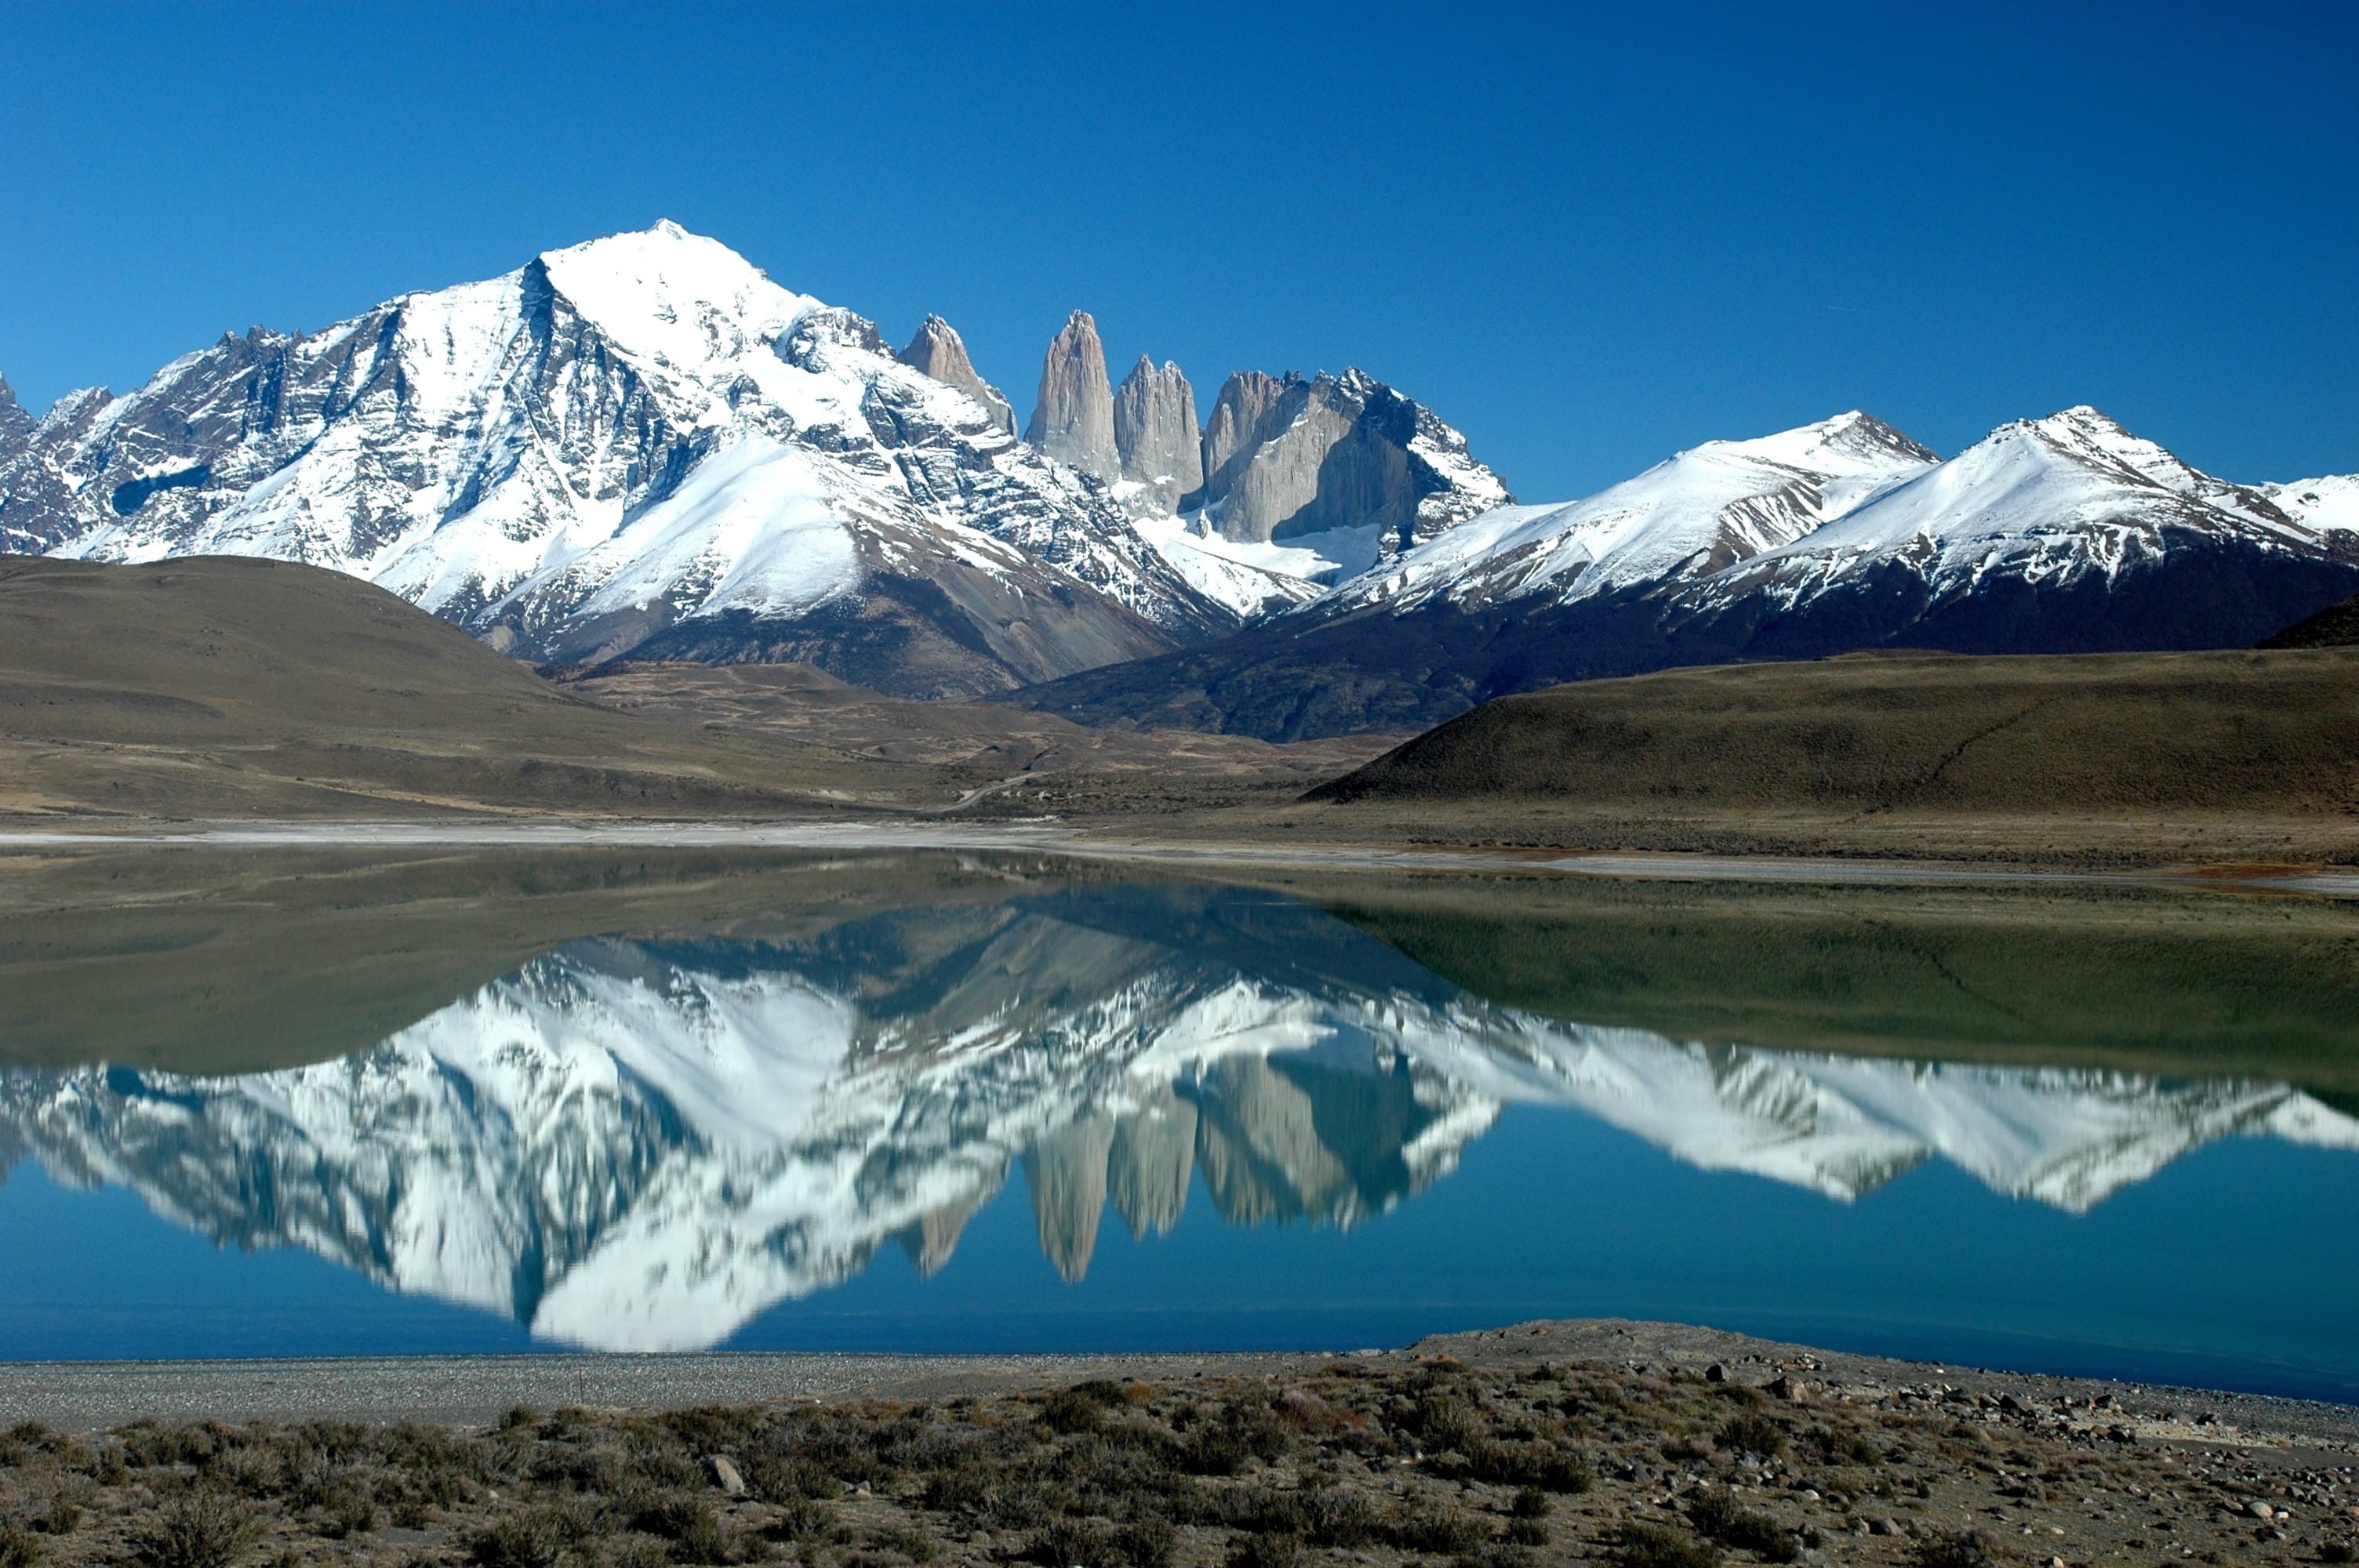 snow covered mountain near body of water, patagonia, fitz roy